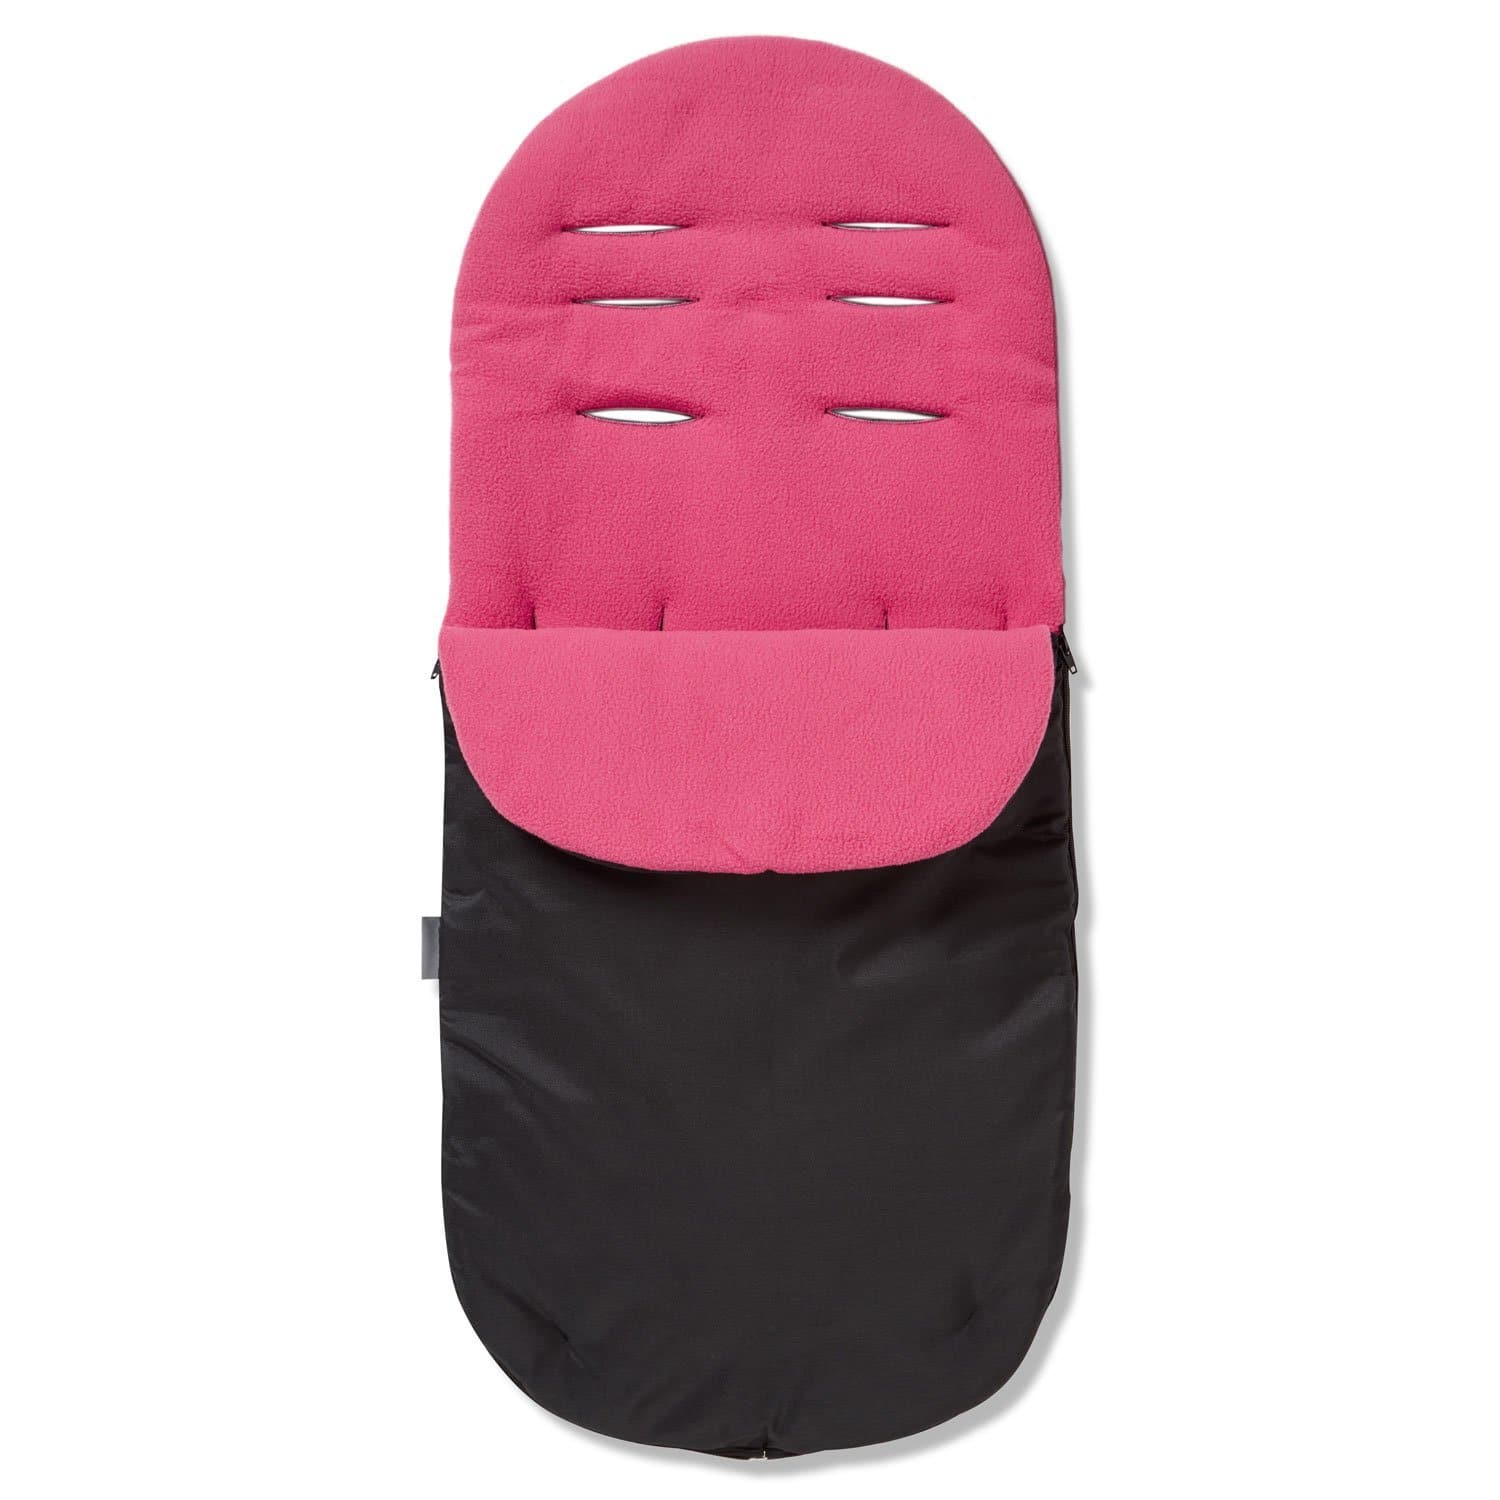 Footmuff / Cosy Toes Compatible with Maclaren - Dark Pink / Fits All Models | For Your Little One